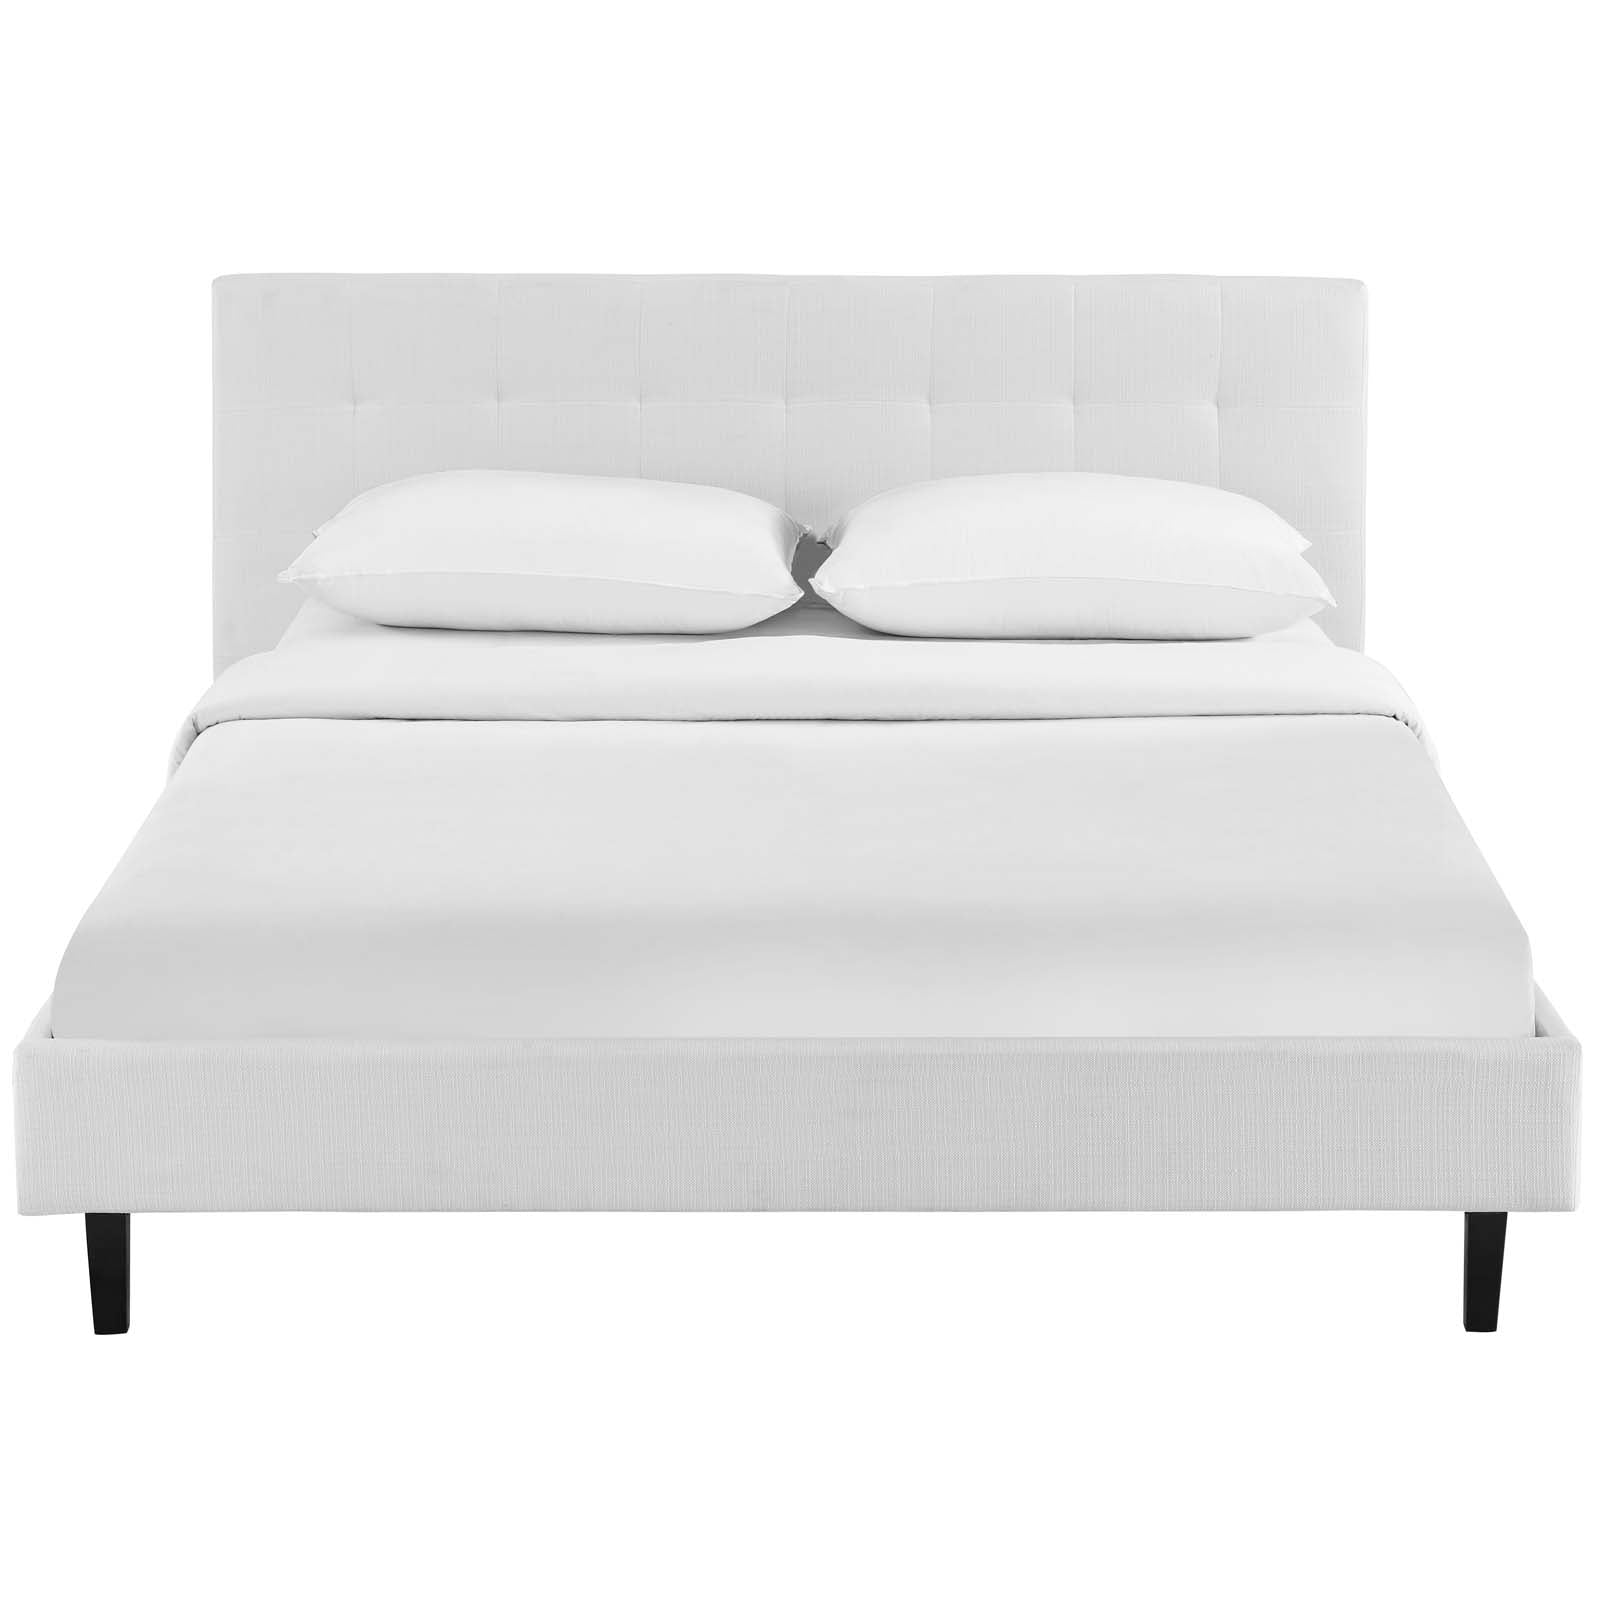 Modway Beds - Linnea Queen Fabric Bed White